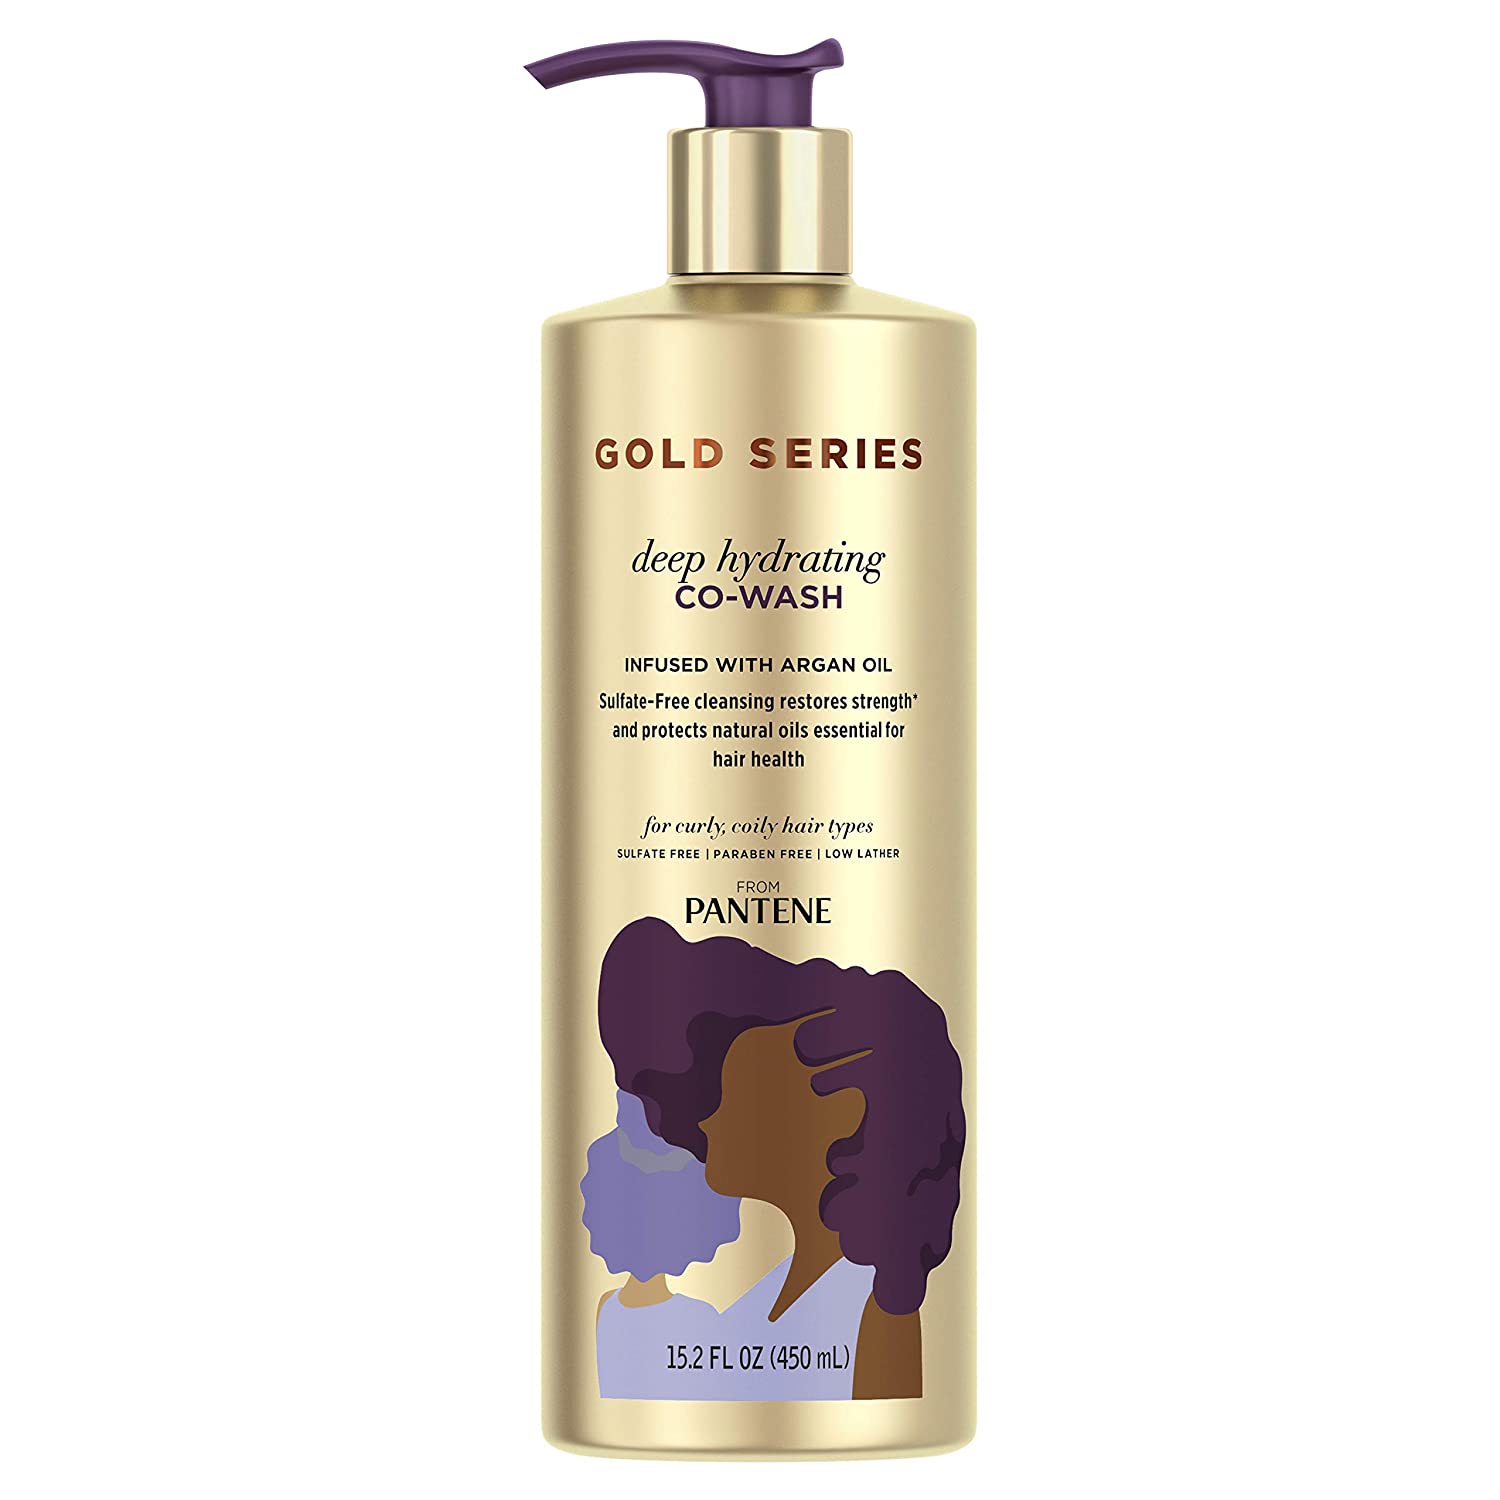 Gold Series from Pantene Sulfate-Free Deep Hydrating Co-Wash for Curly Hair